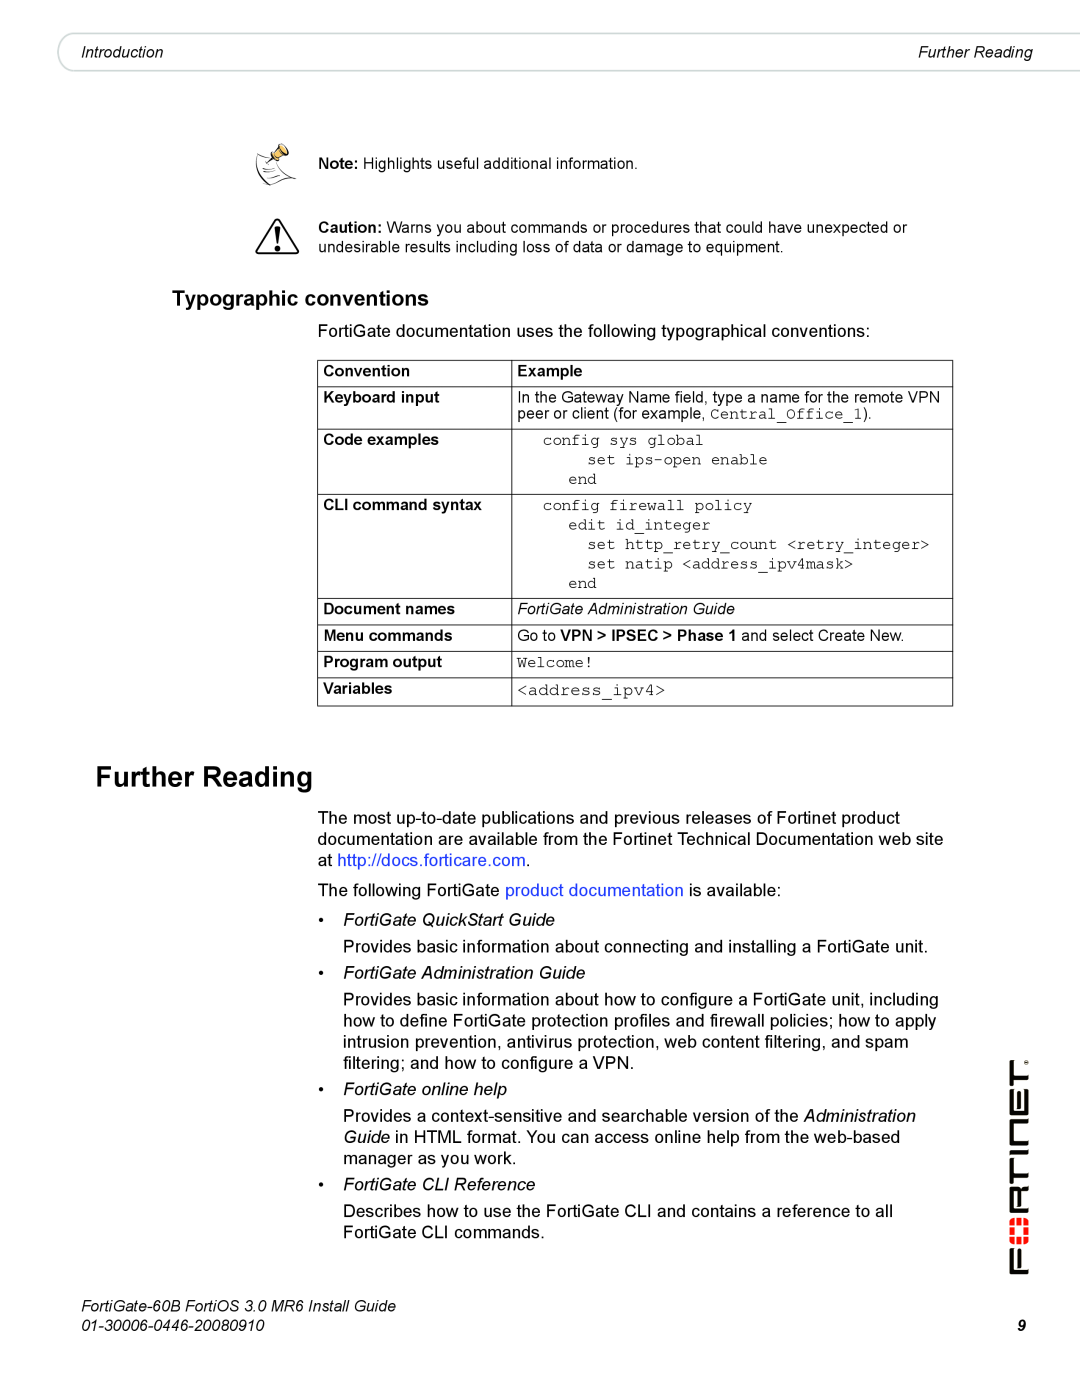 Fortinet 60B manual Further Reading, Typographic conventions, FortiGate QuickStart Guide, FortiGate Administration Guide 